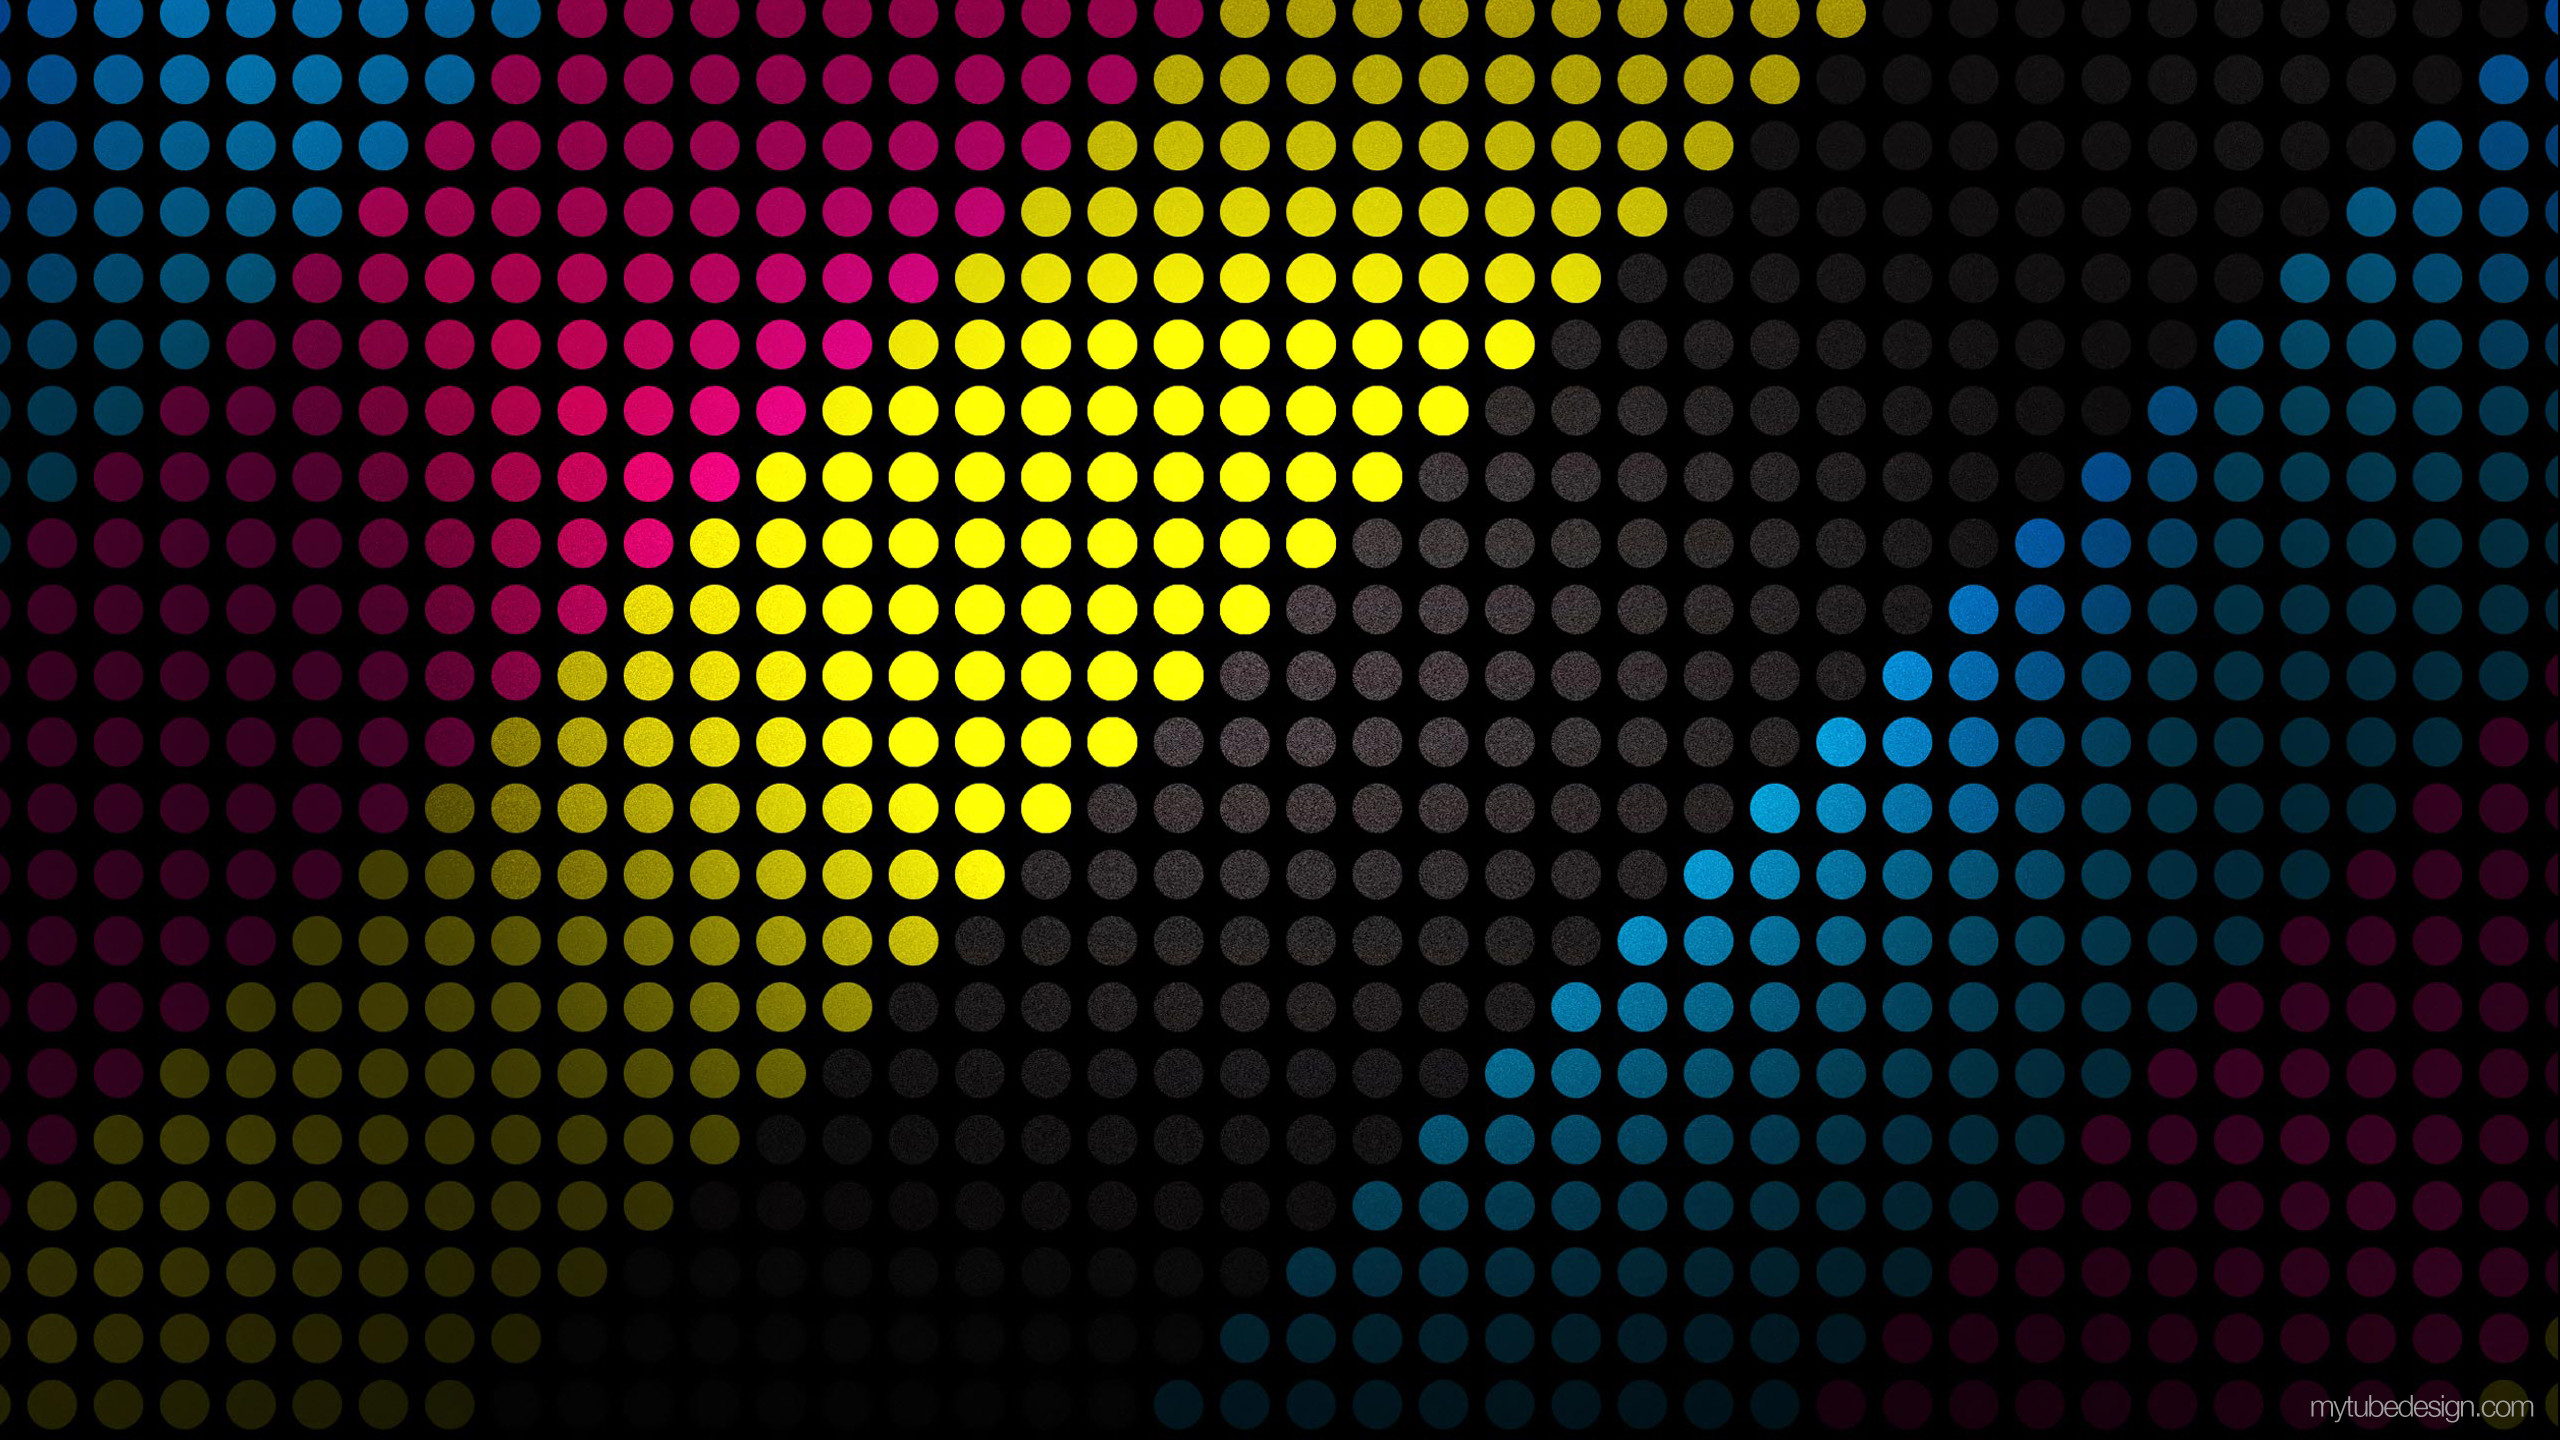 2560x1440 Wallpaper For Youtube 83 Images